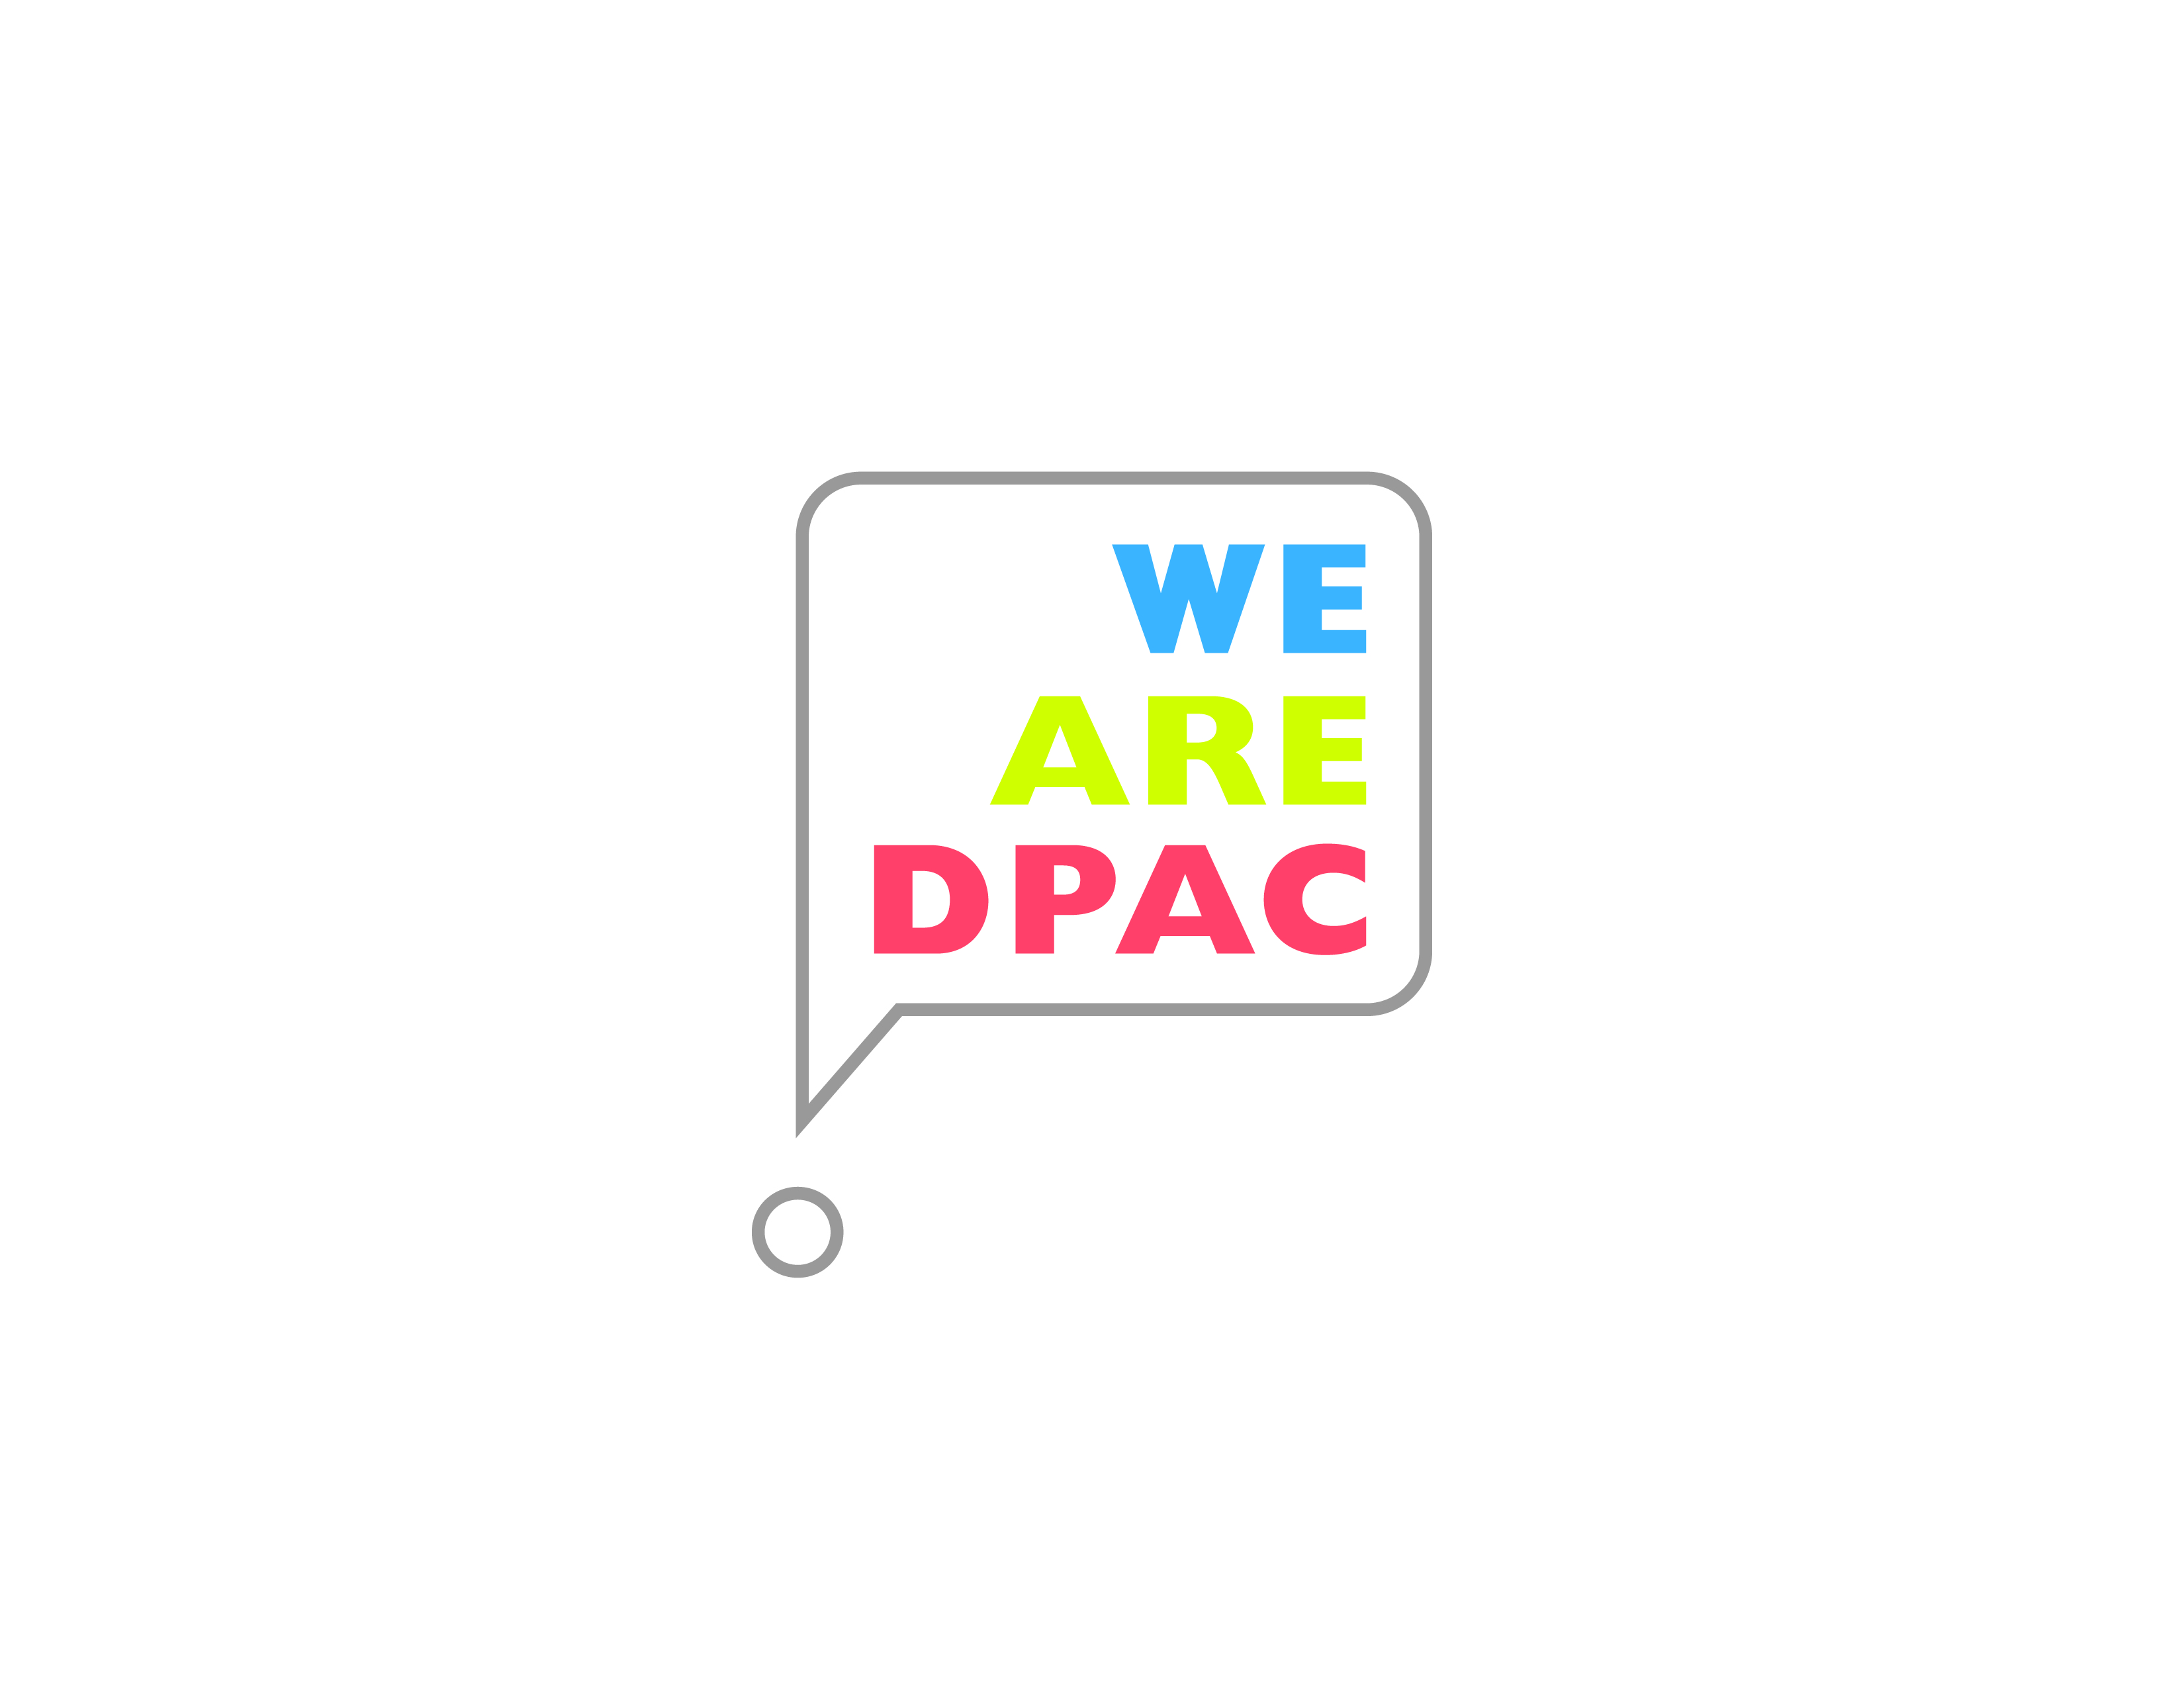 Join DPAC